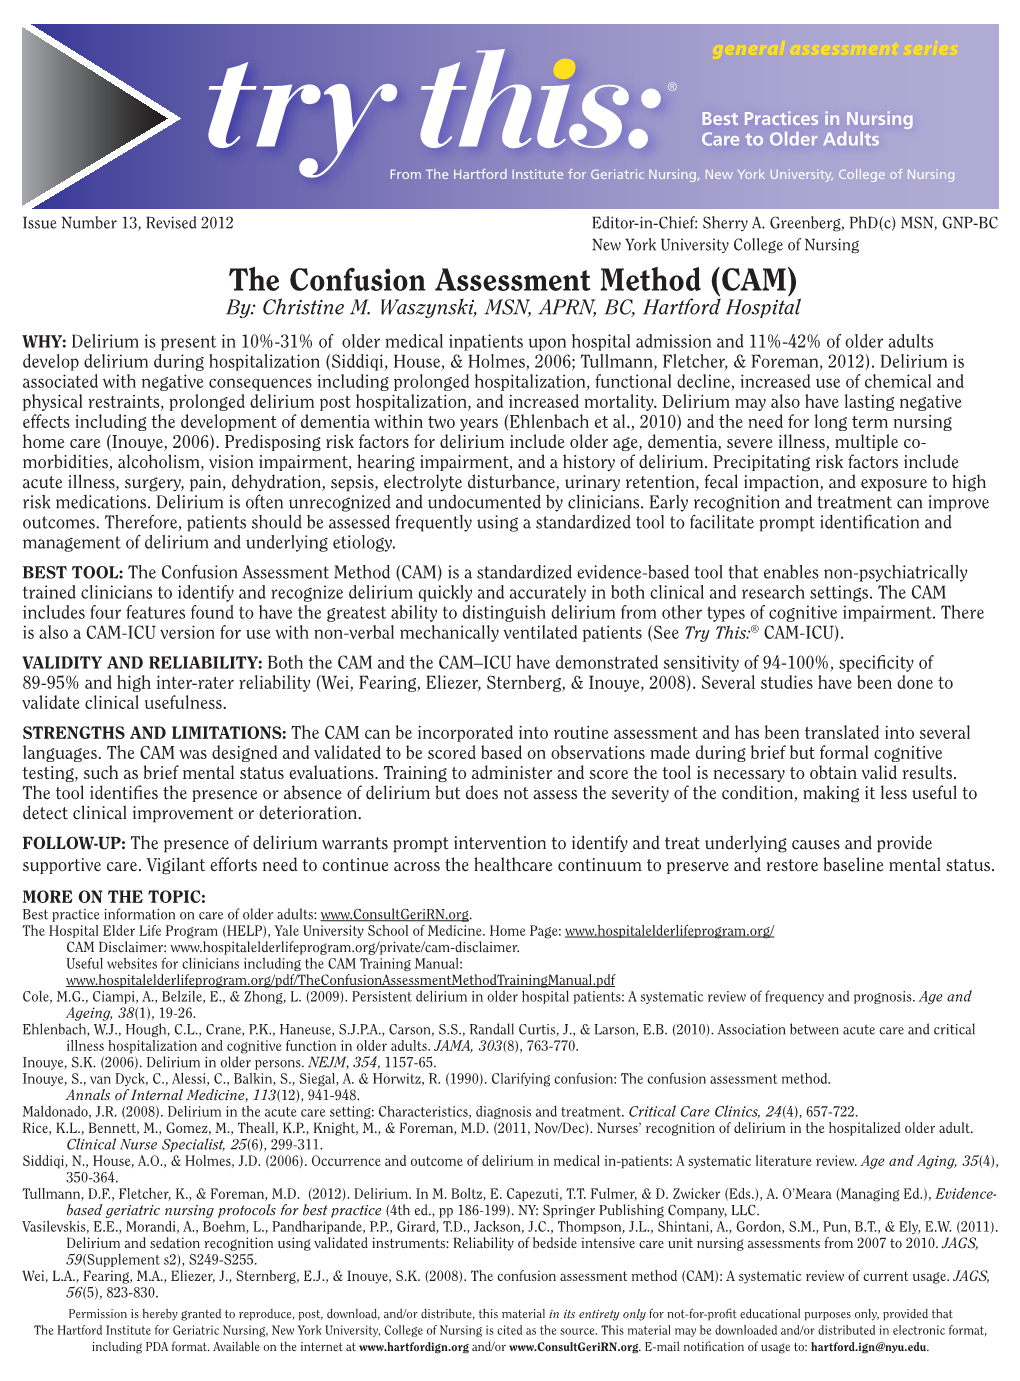 The Confusion Assessment Method (CAM) By: Christine M